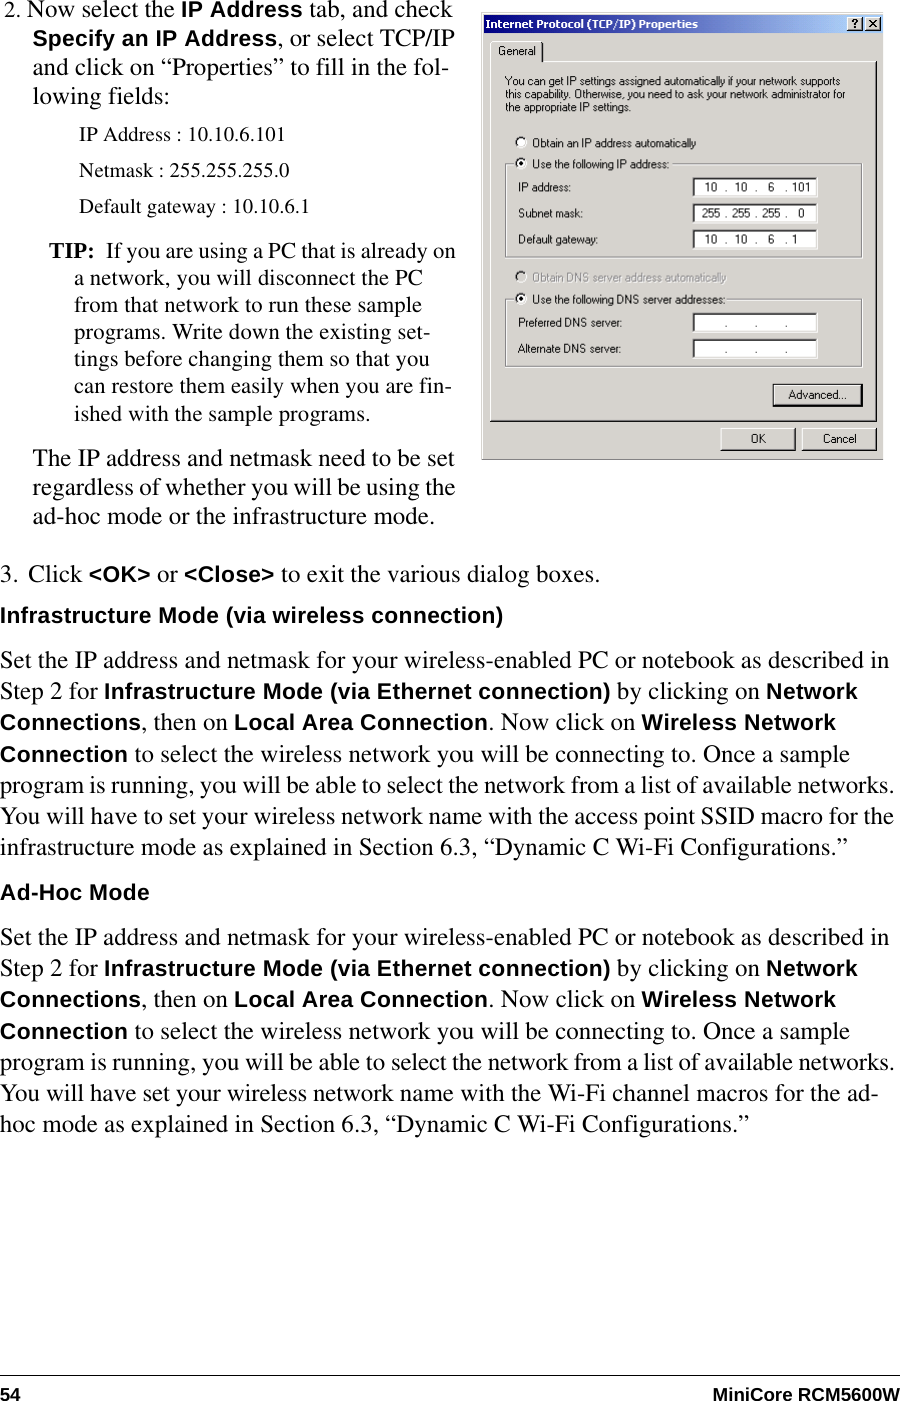 54 MiniCore RCM5600W3. Click &lt;OK&gt; or &lt;Close&gt; to exit the various dialog boxes.Infrastructure Mode (via wireless connection)Set the IP address and netmask for your wireless-enabled PC or notebook as described in Step 2 for Infrastructure Mode (via Ethernet connection) by clicking on Network Connections, then on Local Area Connection. Now click on Wireless Network Connection to select the wireless network you will be connecting to. Once a sample program is running, you will be able to select the network from a list of available networks. You will have to set your wireless network name with the access point SSID macro for the infrastructure mode as explained in Section 6.3, “Dynamic C Wi-Fi Configurations.”Ad-Hoc ModeSet the IP address and netmask for your wireless-enabled PC or notebook as described in Step 2 for Infrastructure Mode (via Ethernet connection) by clicking on Network Connections, then on Local Area Connection. Now click on Wireless Network Connection to select the wireless network you will be connecting to. Once a sample program is running, you will be able to select the network from a list of available networks. You will have set your wireless network name with the Wi-Fi channel macros for the ad-hoc mode as explained in Section 6.3, “Dynamic C Wi-Fi Configurations.”2. Now select the IP Address tab, and check Specify an IP Address, or select TCP/IP and click on “Properties” to fill in the fol-lowing fields:IP Address : 10.10.6.101Netmask : 255.255.255.0Default gateway : 10.10.6.1TIP: If you are using a PC that is already on a network, you will disconnect the PC from that network to run these sample programs. Write down the existing set-tings before changing them so that you can restore them easily when you are fin-ished with the sample programs.The IP address and netmask need to be set regardless of whether you will be using the ad-hoc mode or the infrastructure mode.